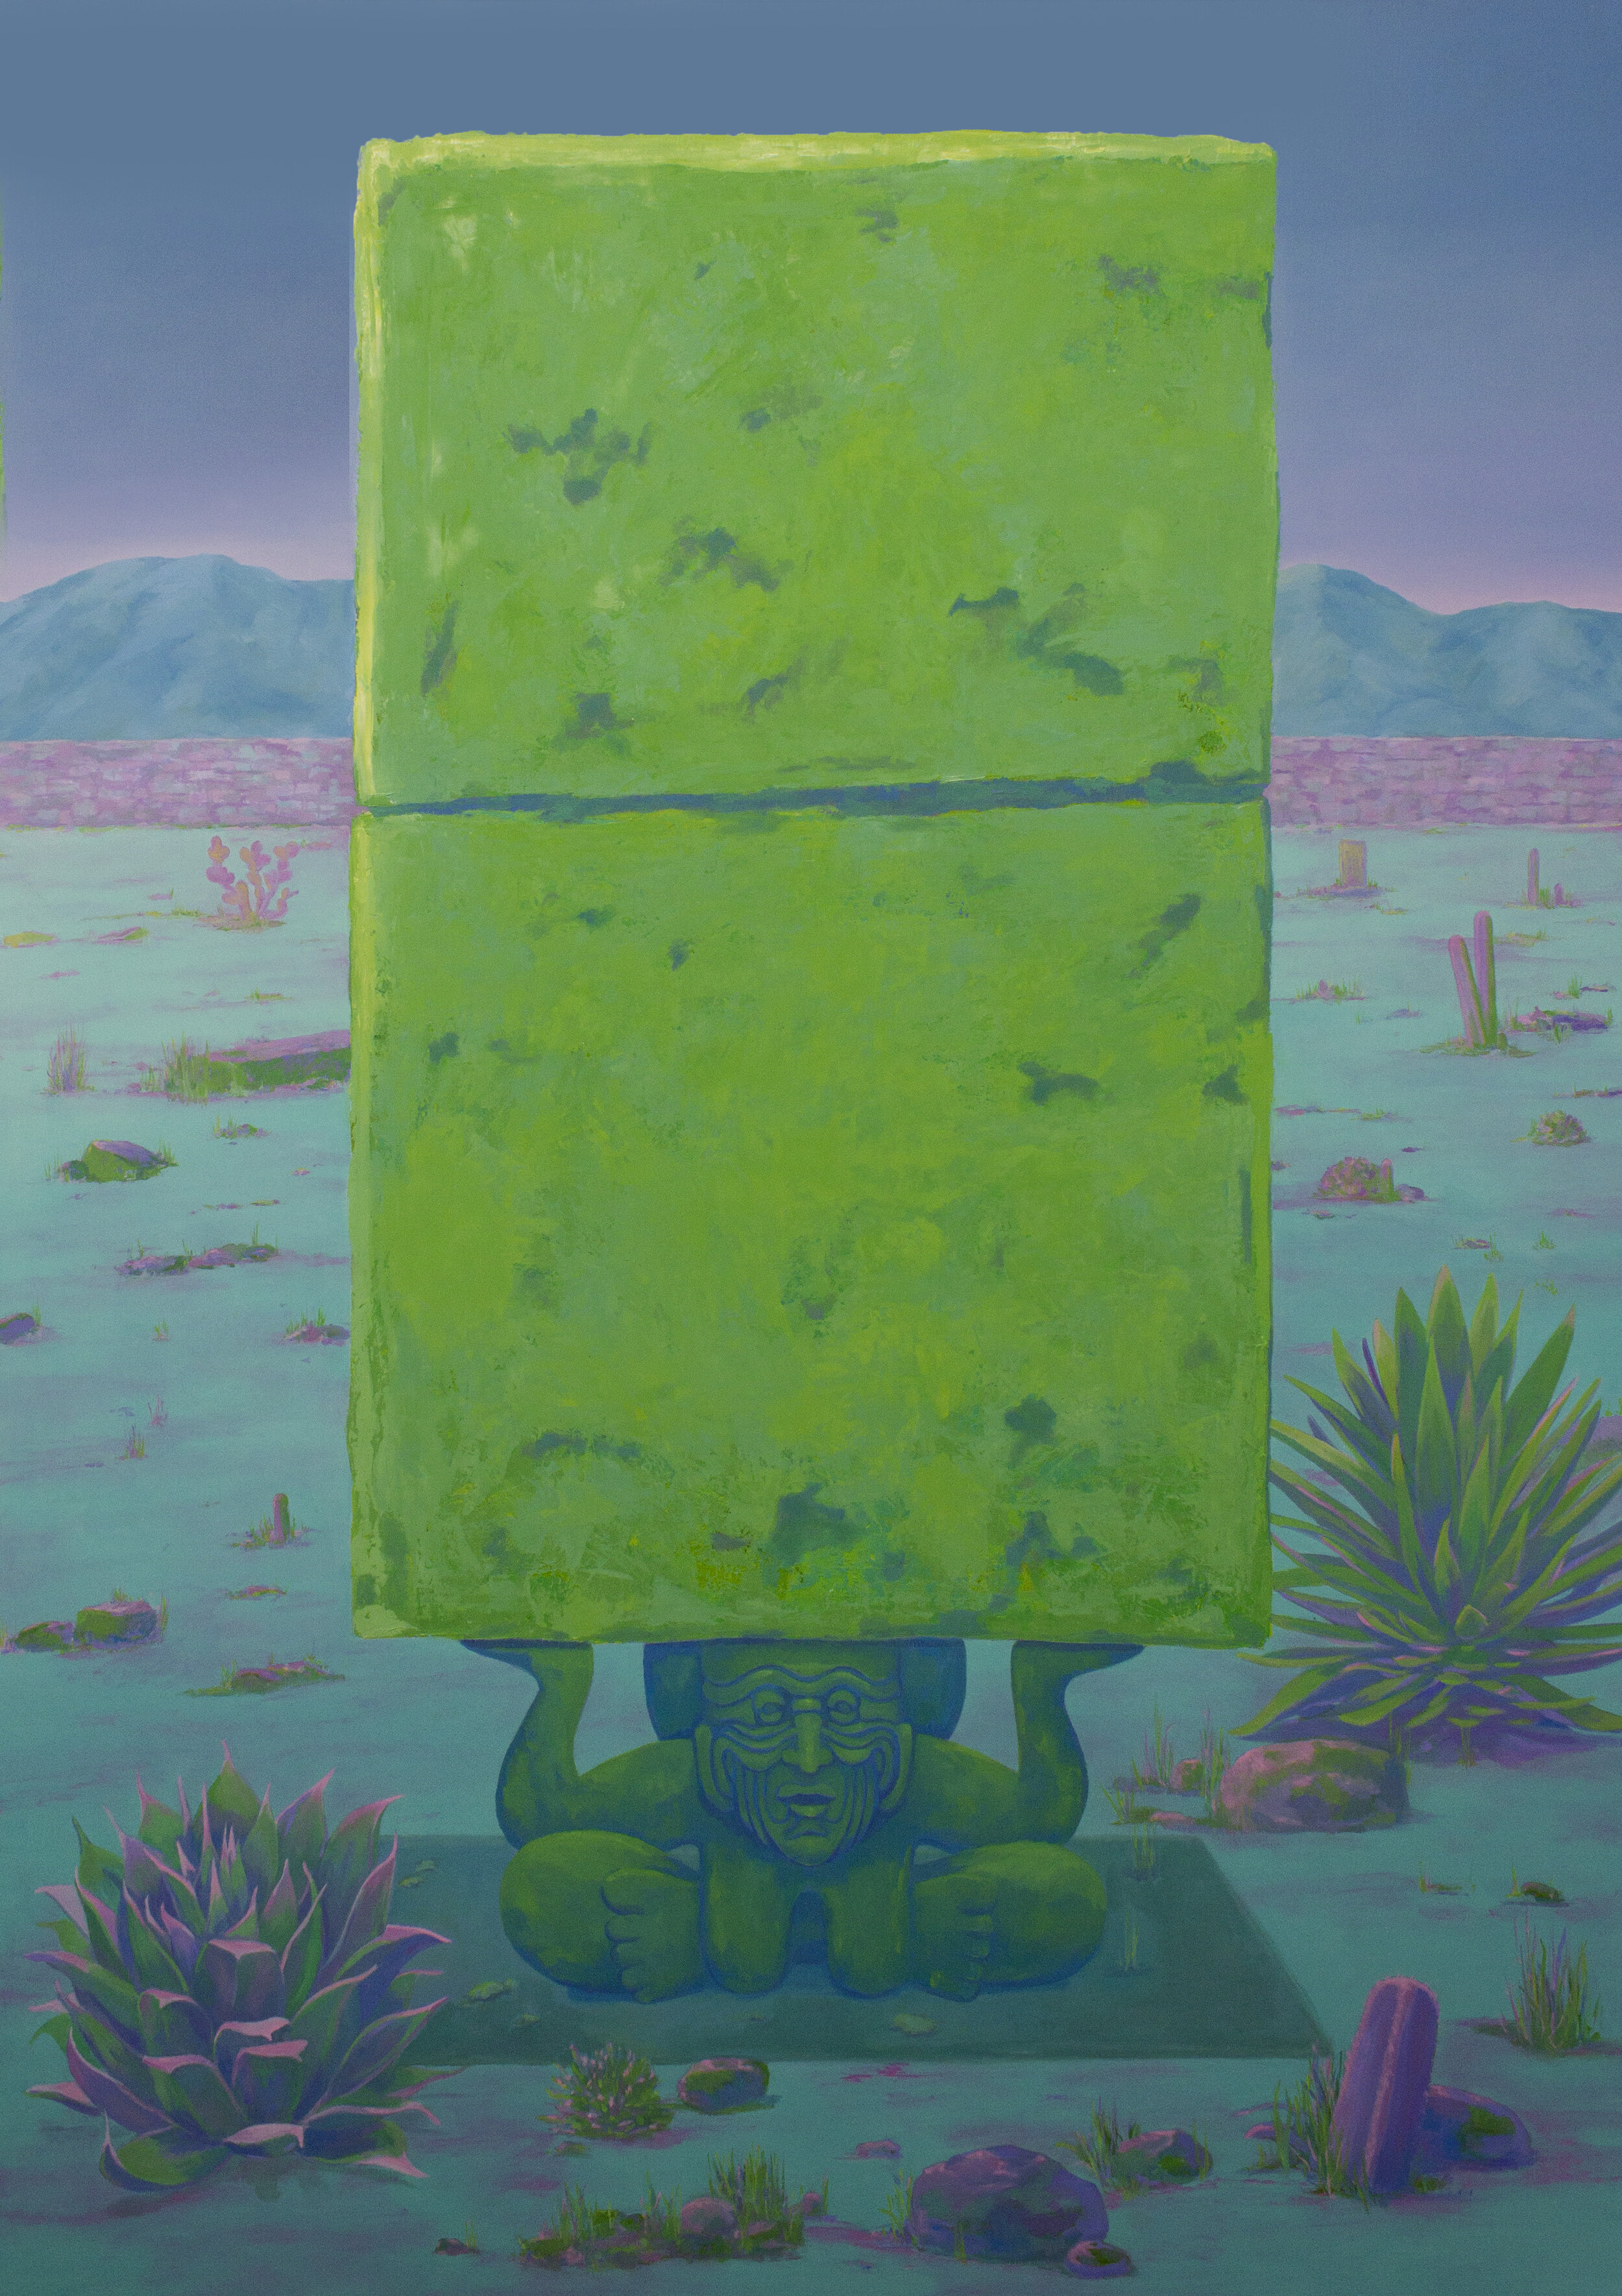 Huehueteotl Oil on Canvas 72 x 52 inches 2020